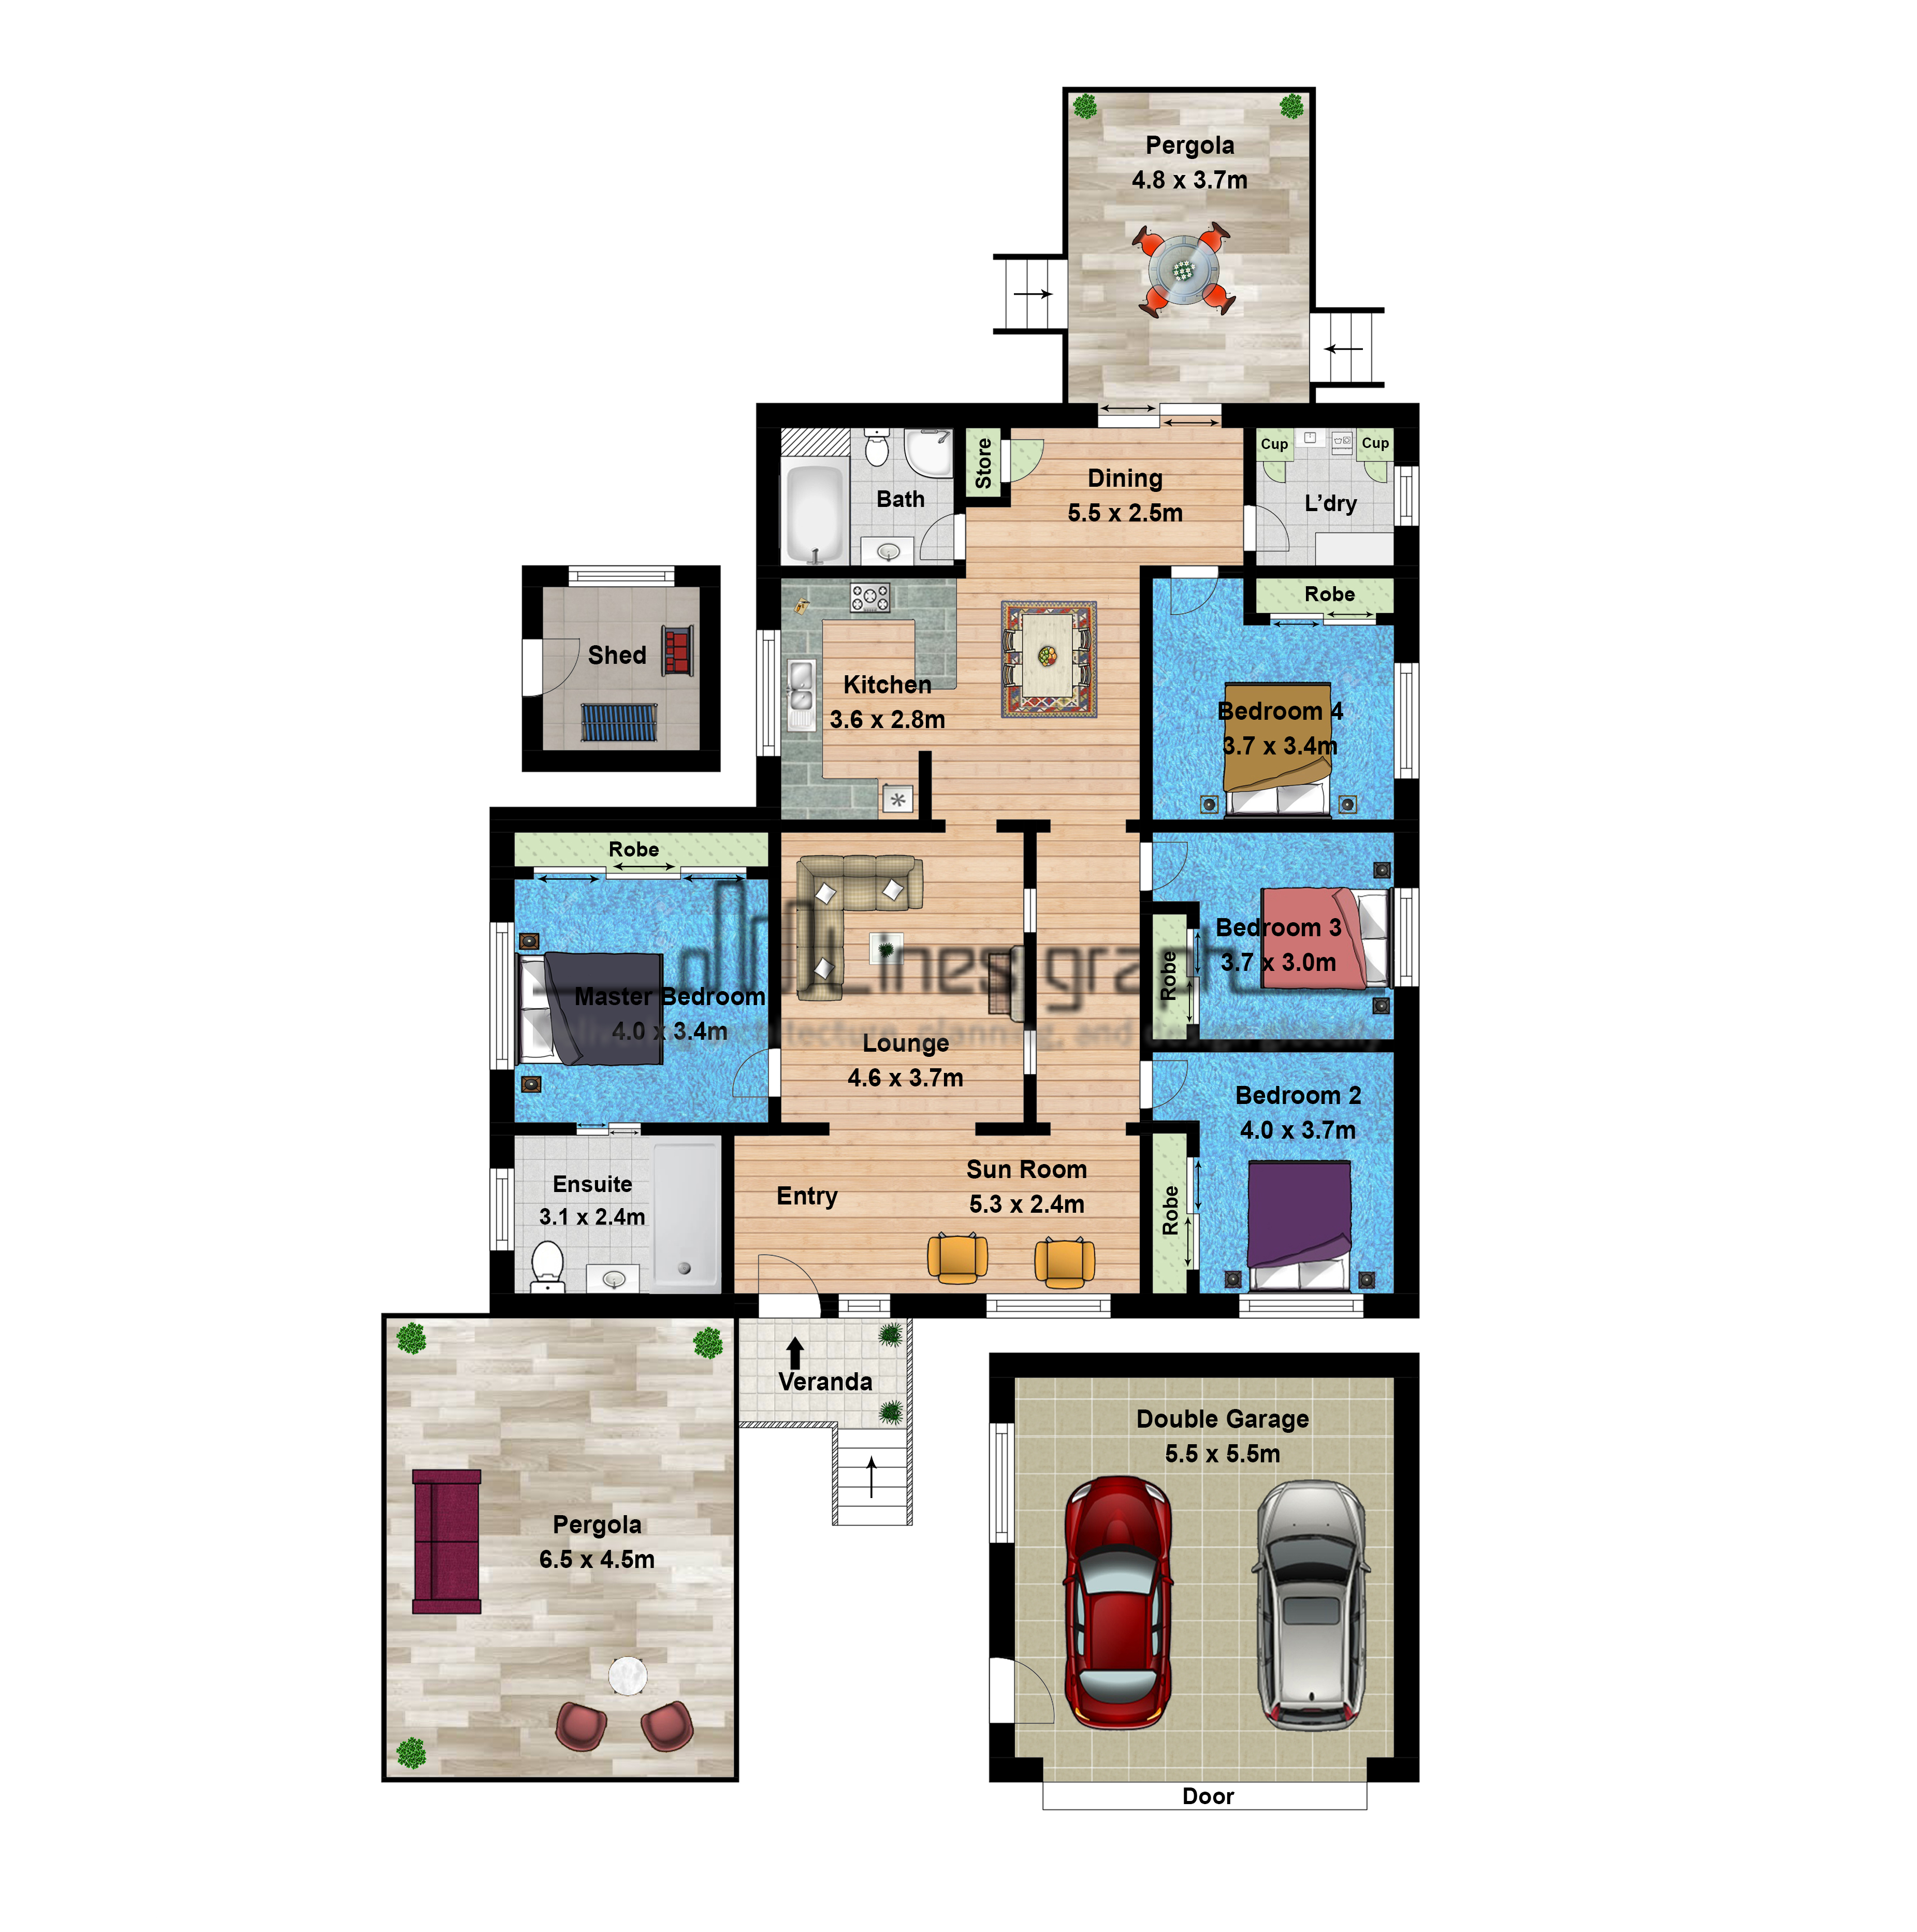 2D Textured Floor Plan by Linesgraph (1) Syncronia